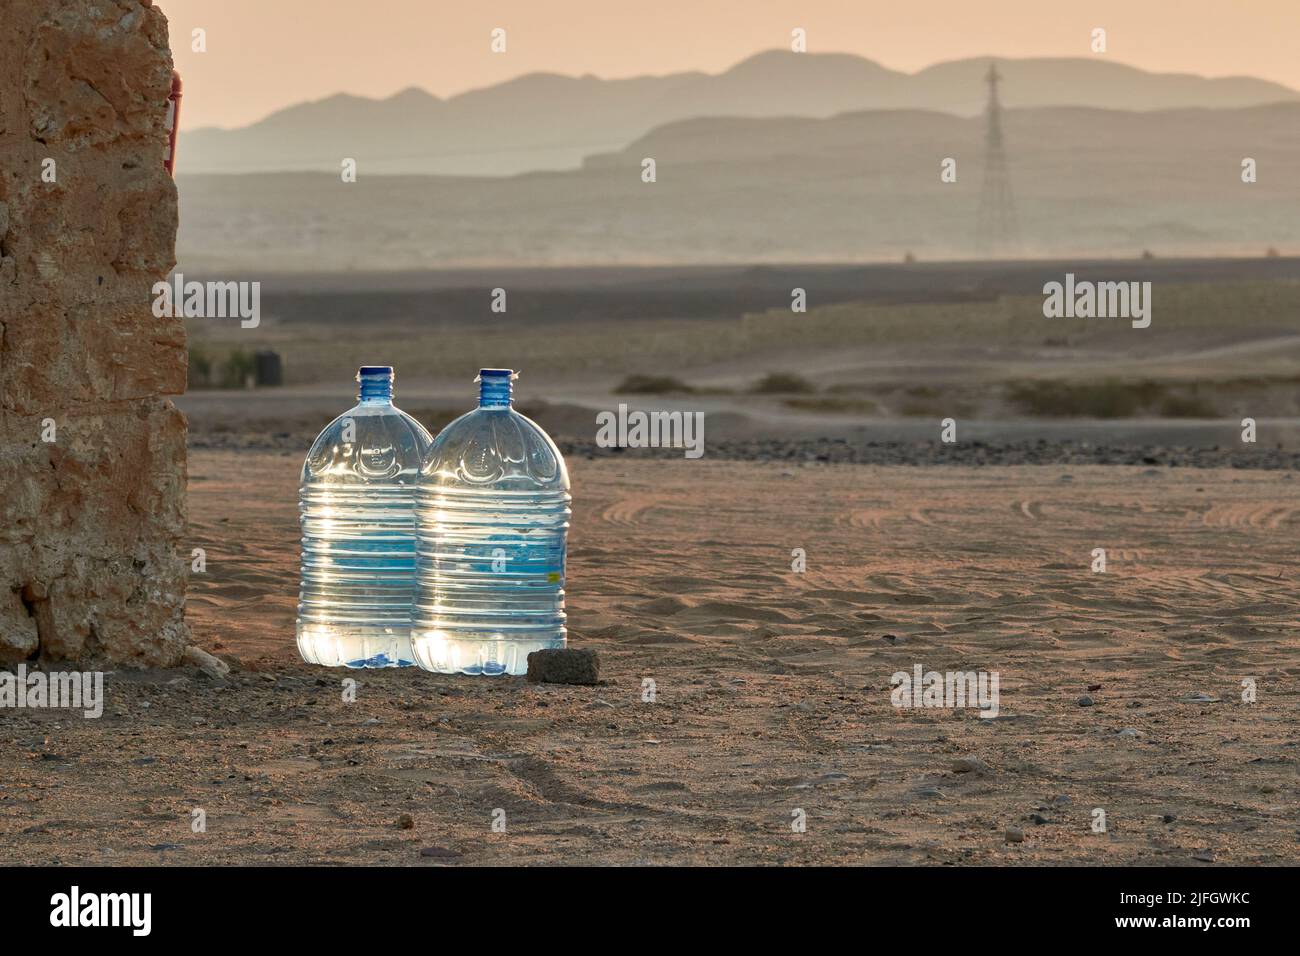 Two 2 Large Reusable Bottles With Drinking Water Stand In The Desert Sand At Sunset. Blurred Mountain Range In The Background. Marsa Alam, Egypt Stock Photo